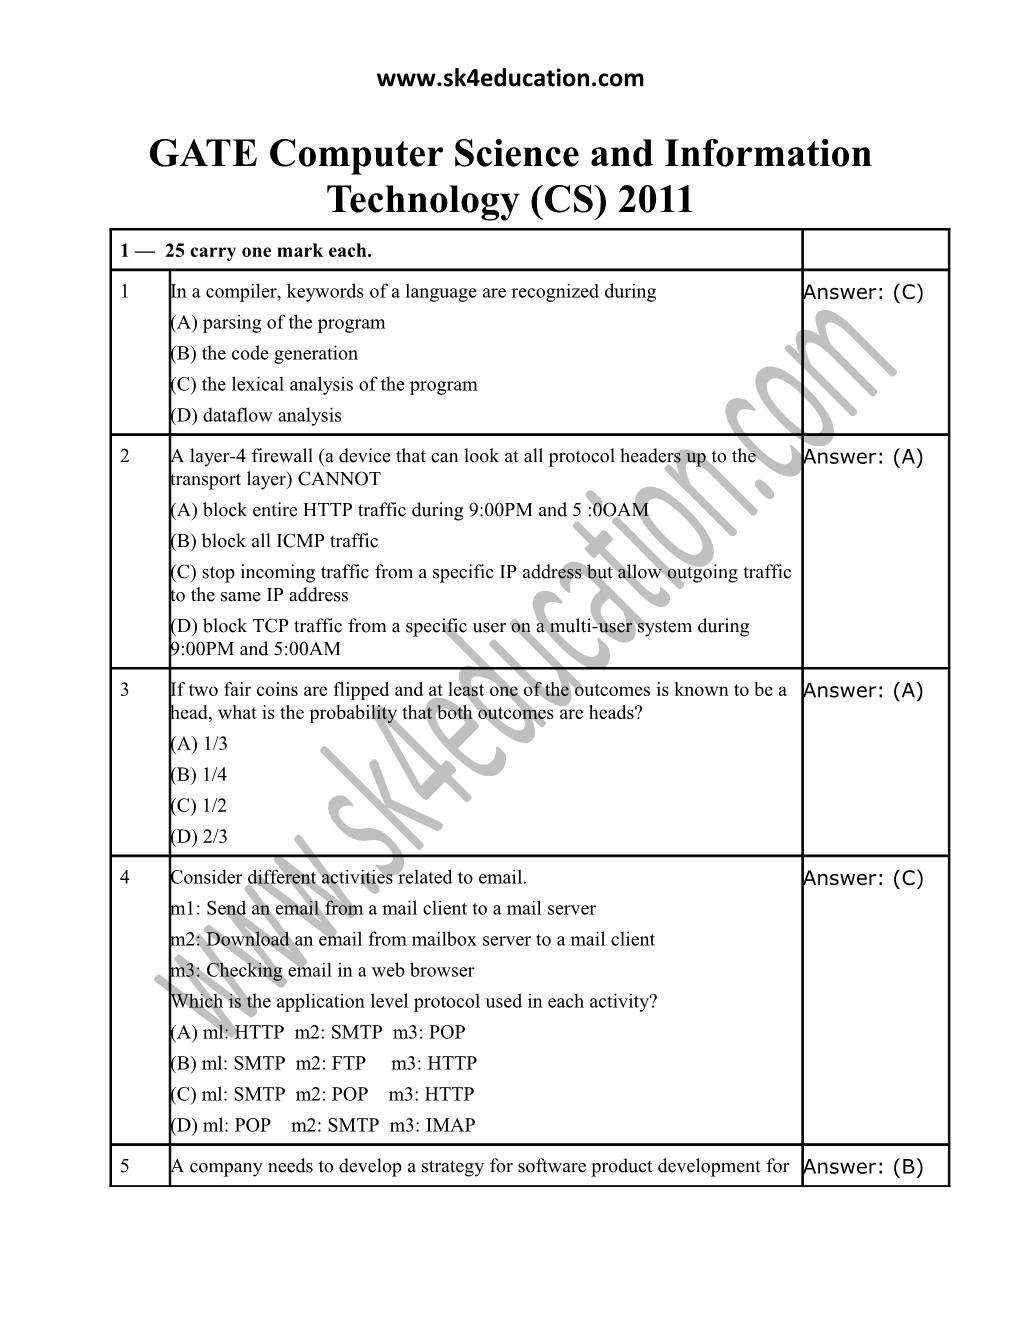 GATE Computer Science and Information Technology (CS) 2011